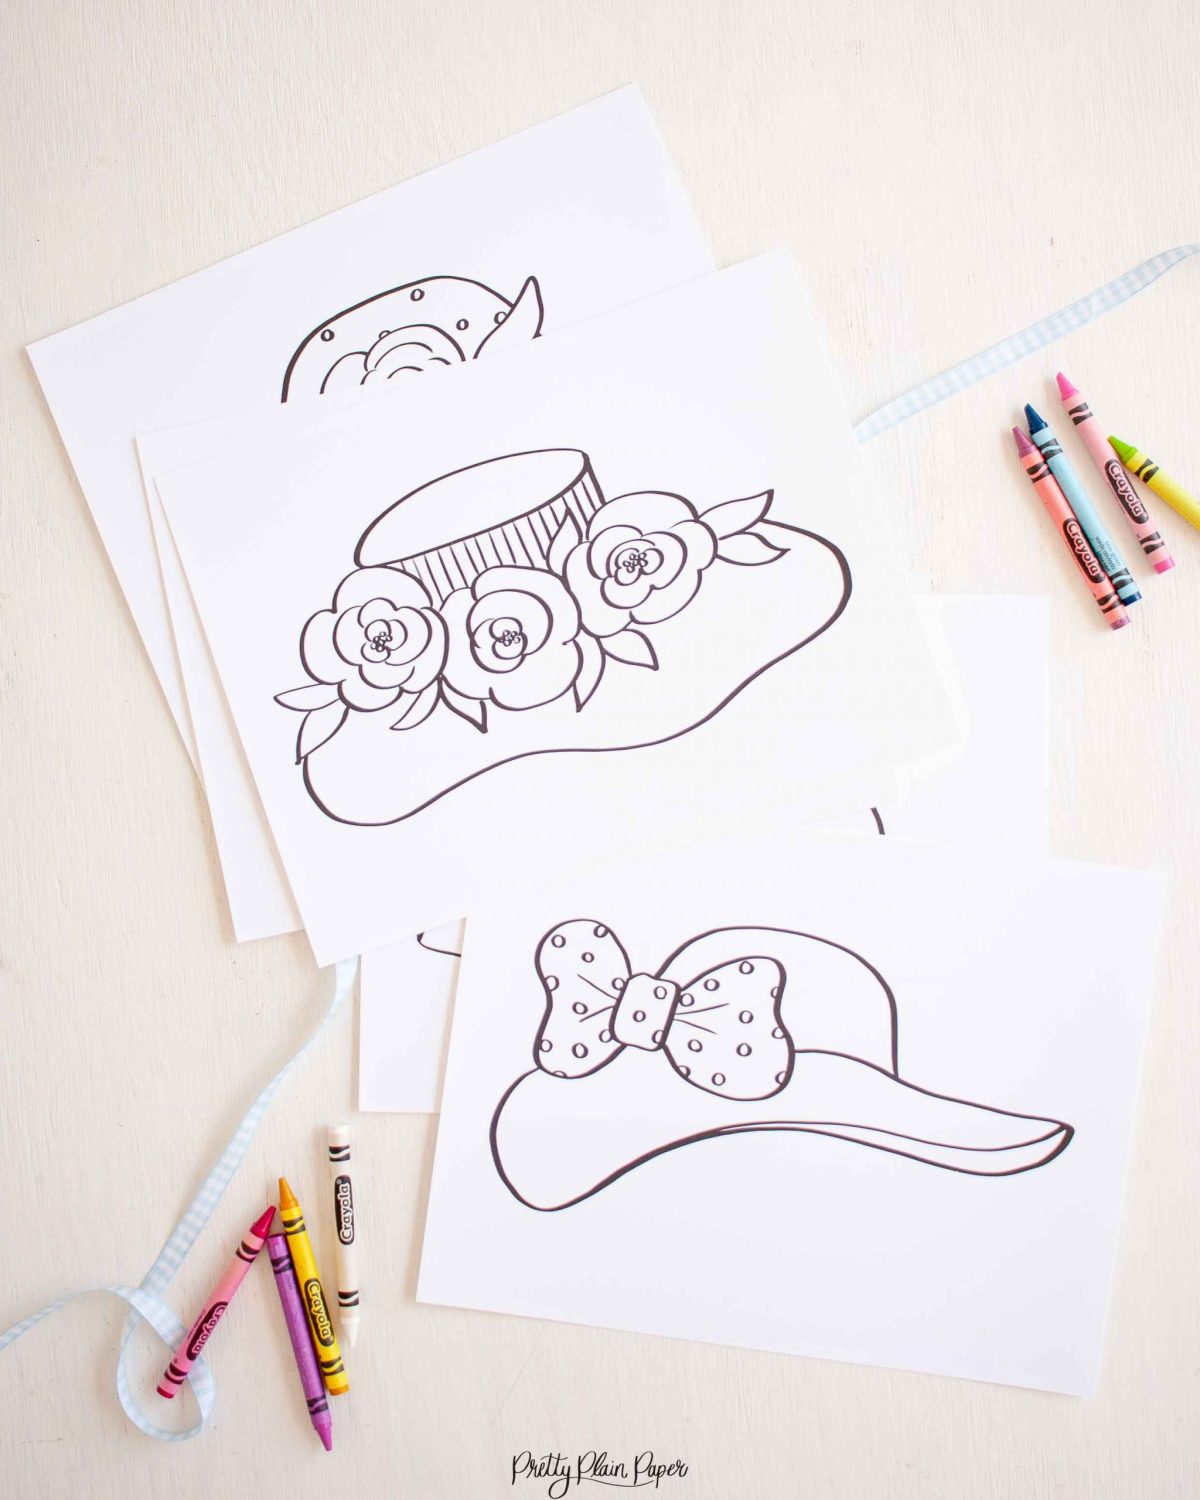 Fancy Derby Hats Coloring Page Printable by Pretty Plain Paper